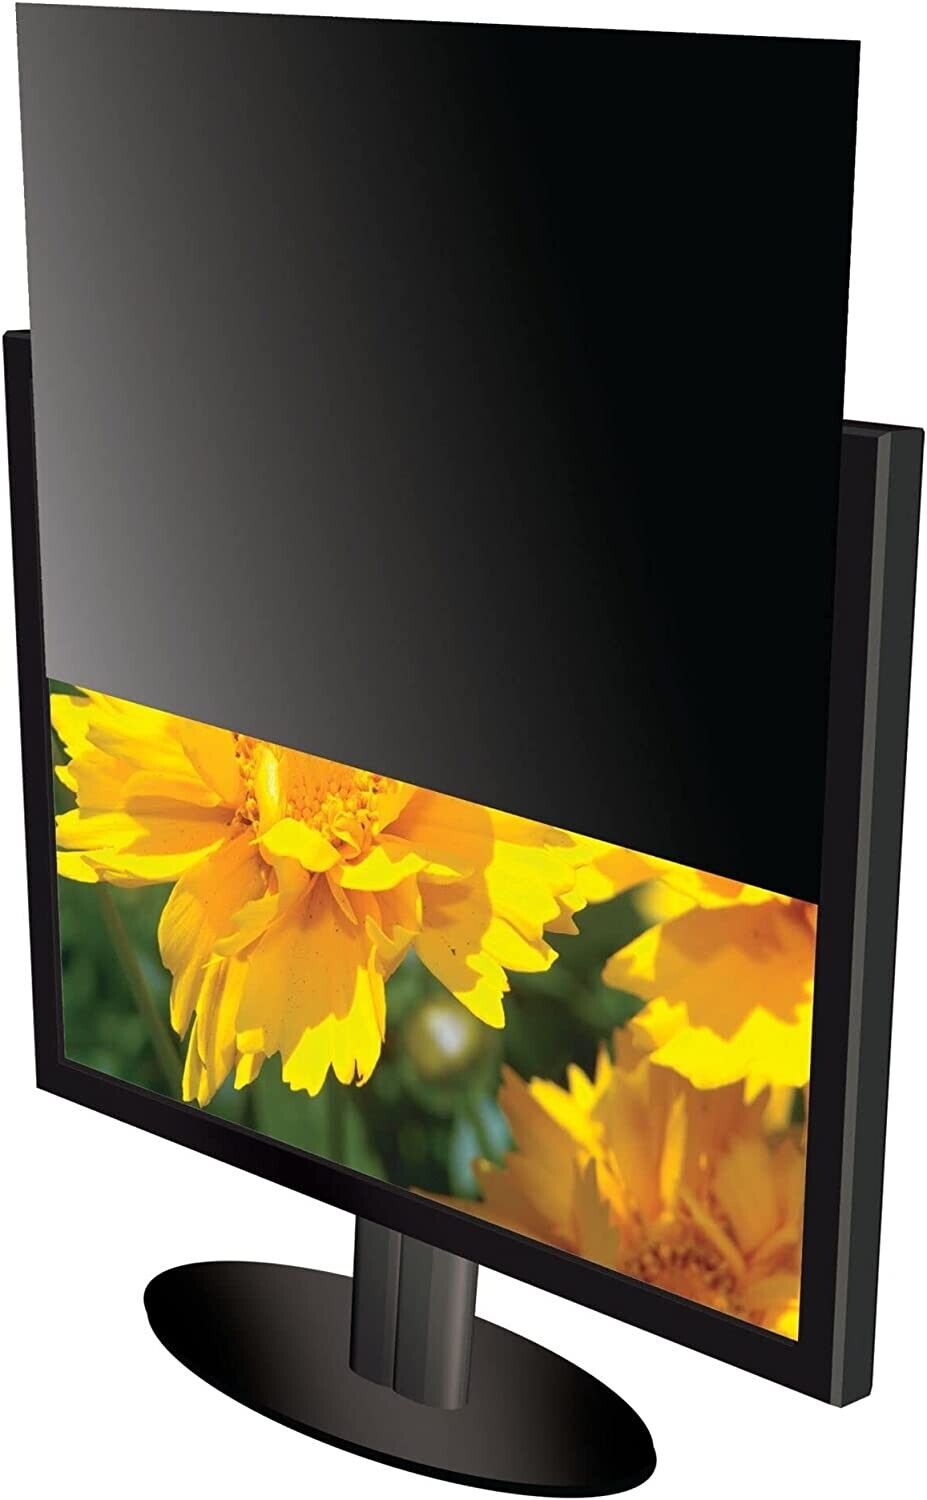 Kantek Secure-View Blackout Privacy Filter for 17-Inch Standard Monitors